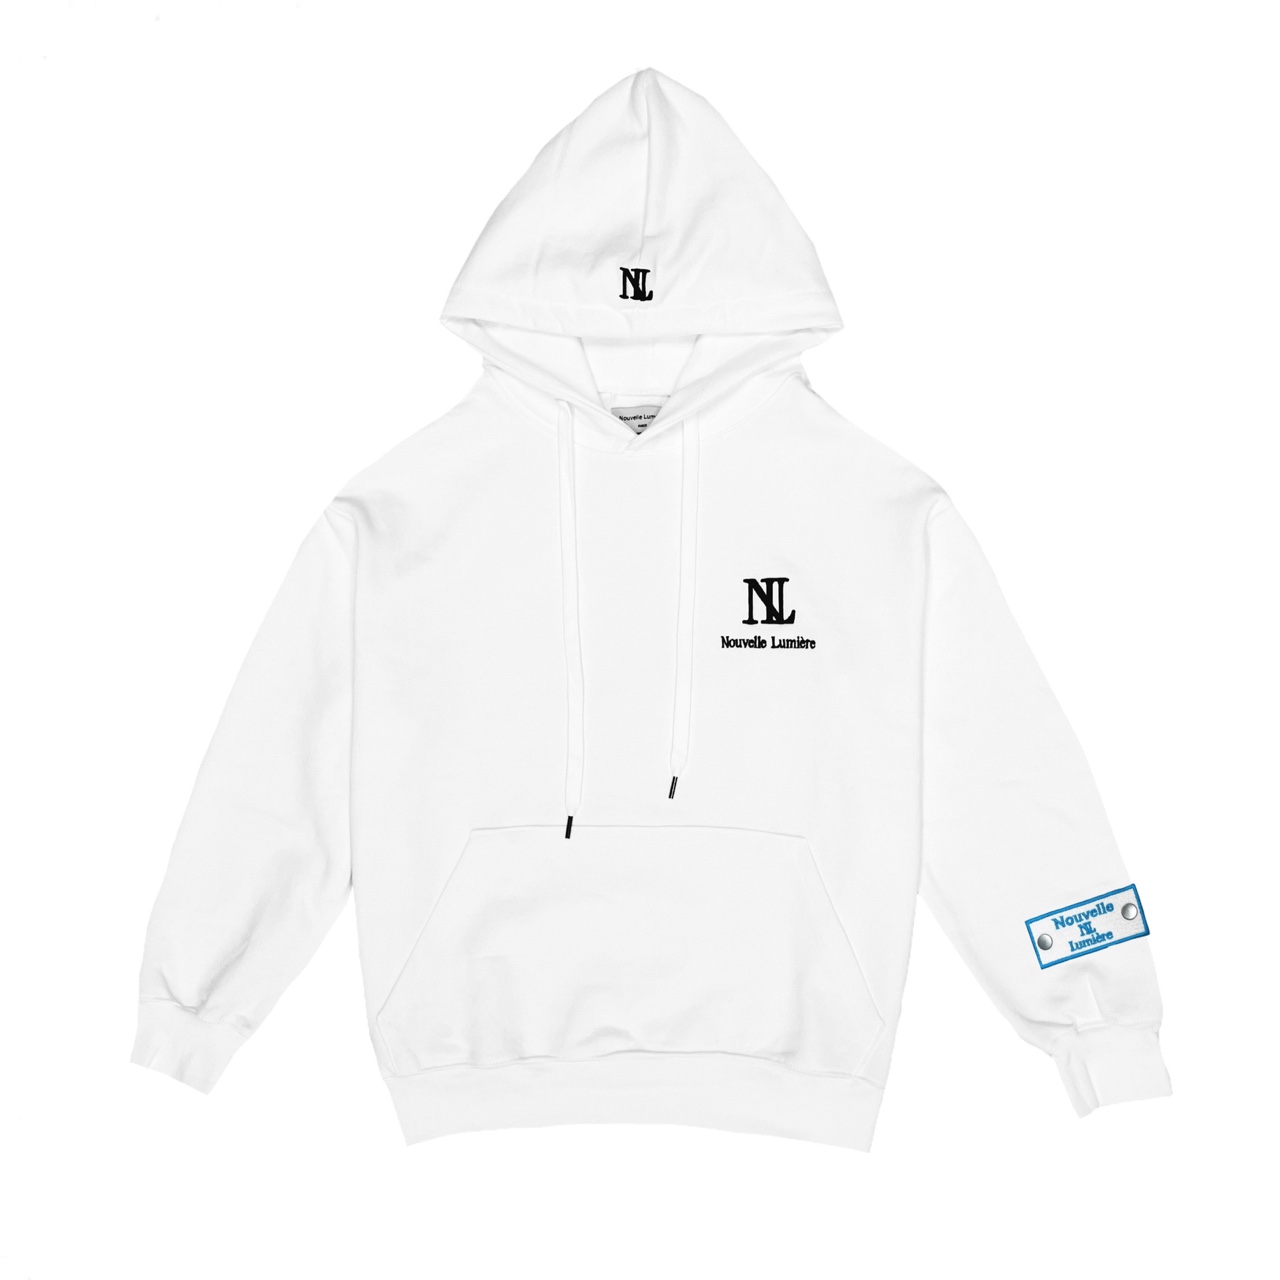 Nouvelle Miere White Hoodie Coral Blue and Pen